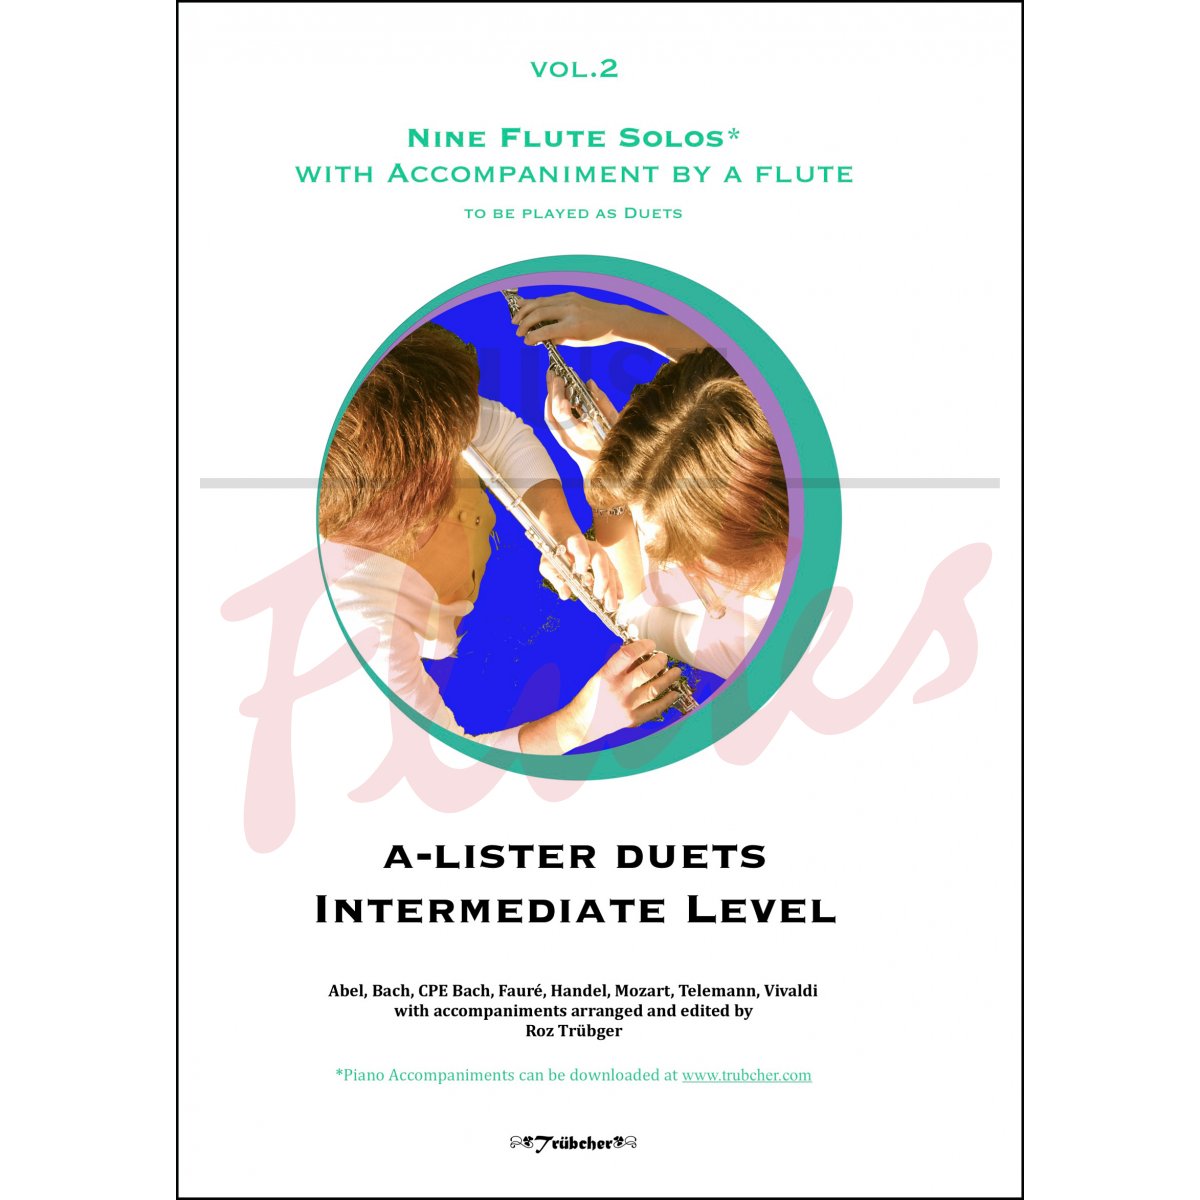 A-Listers Duets Vol 2: Nine flute solos with accompaniments for a 2nd flute